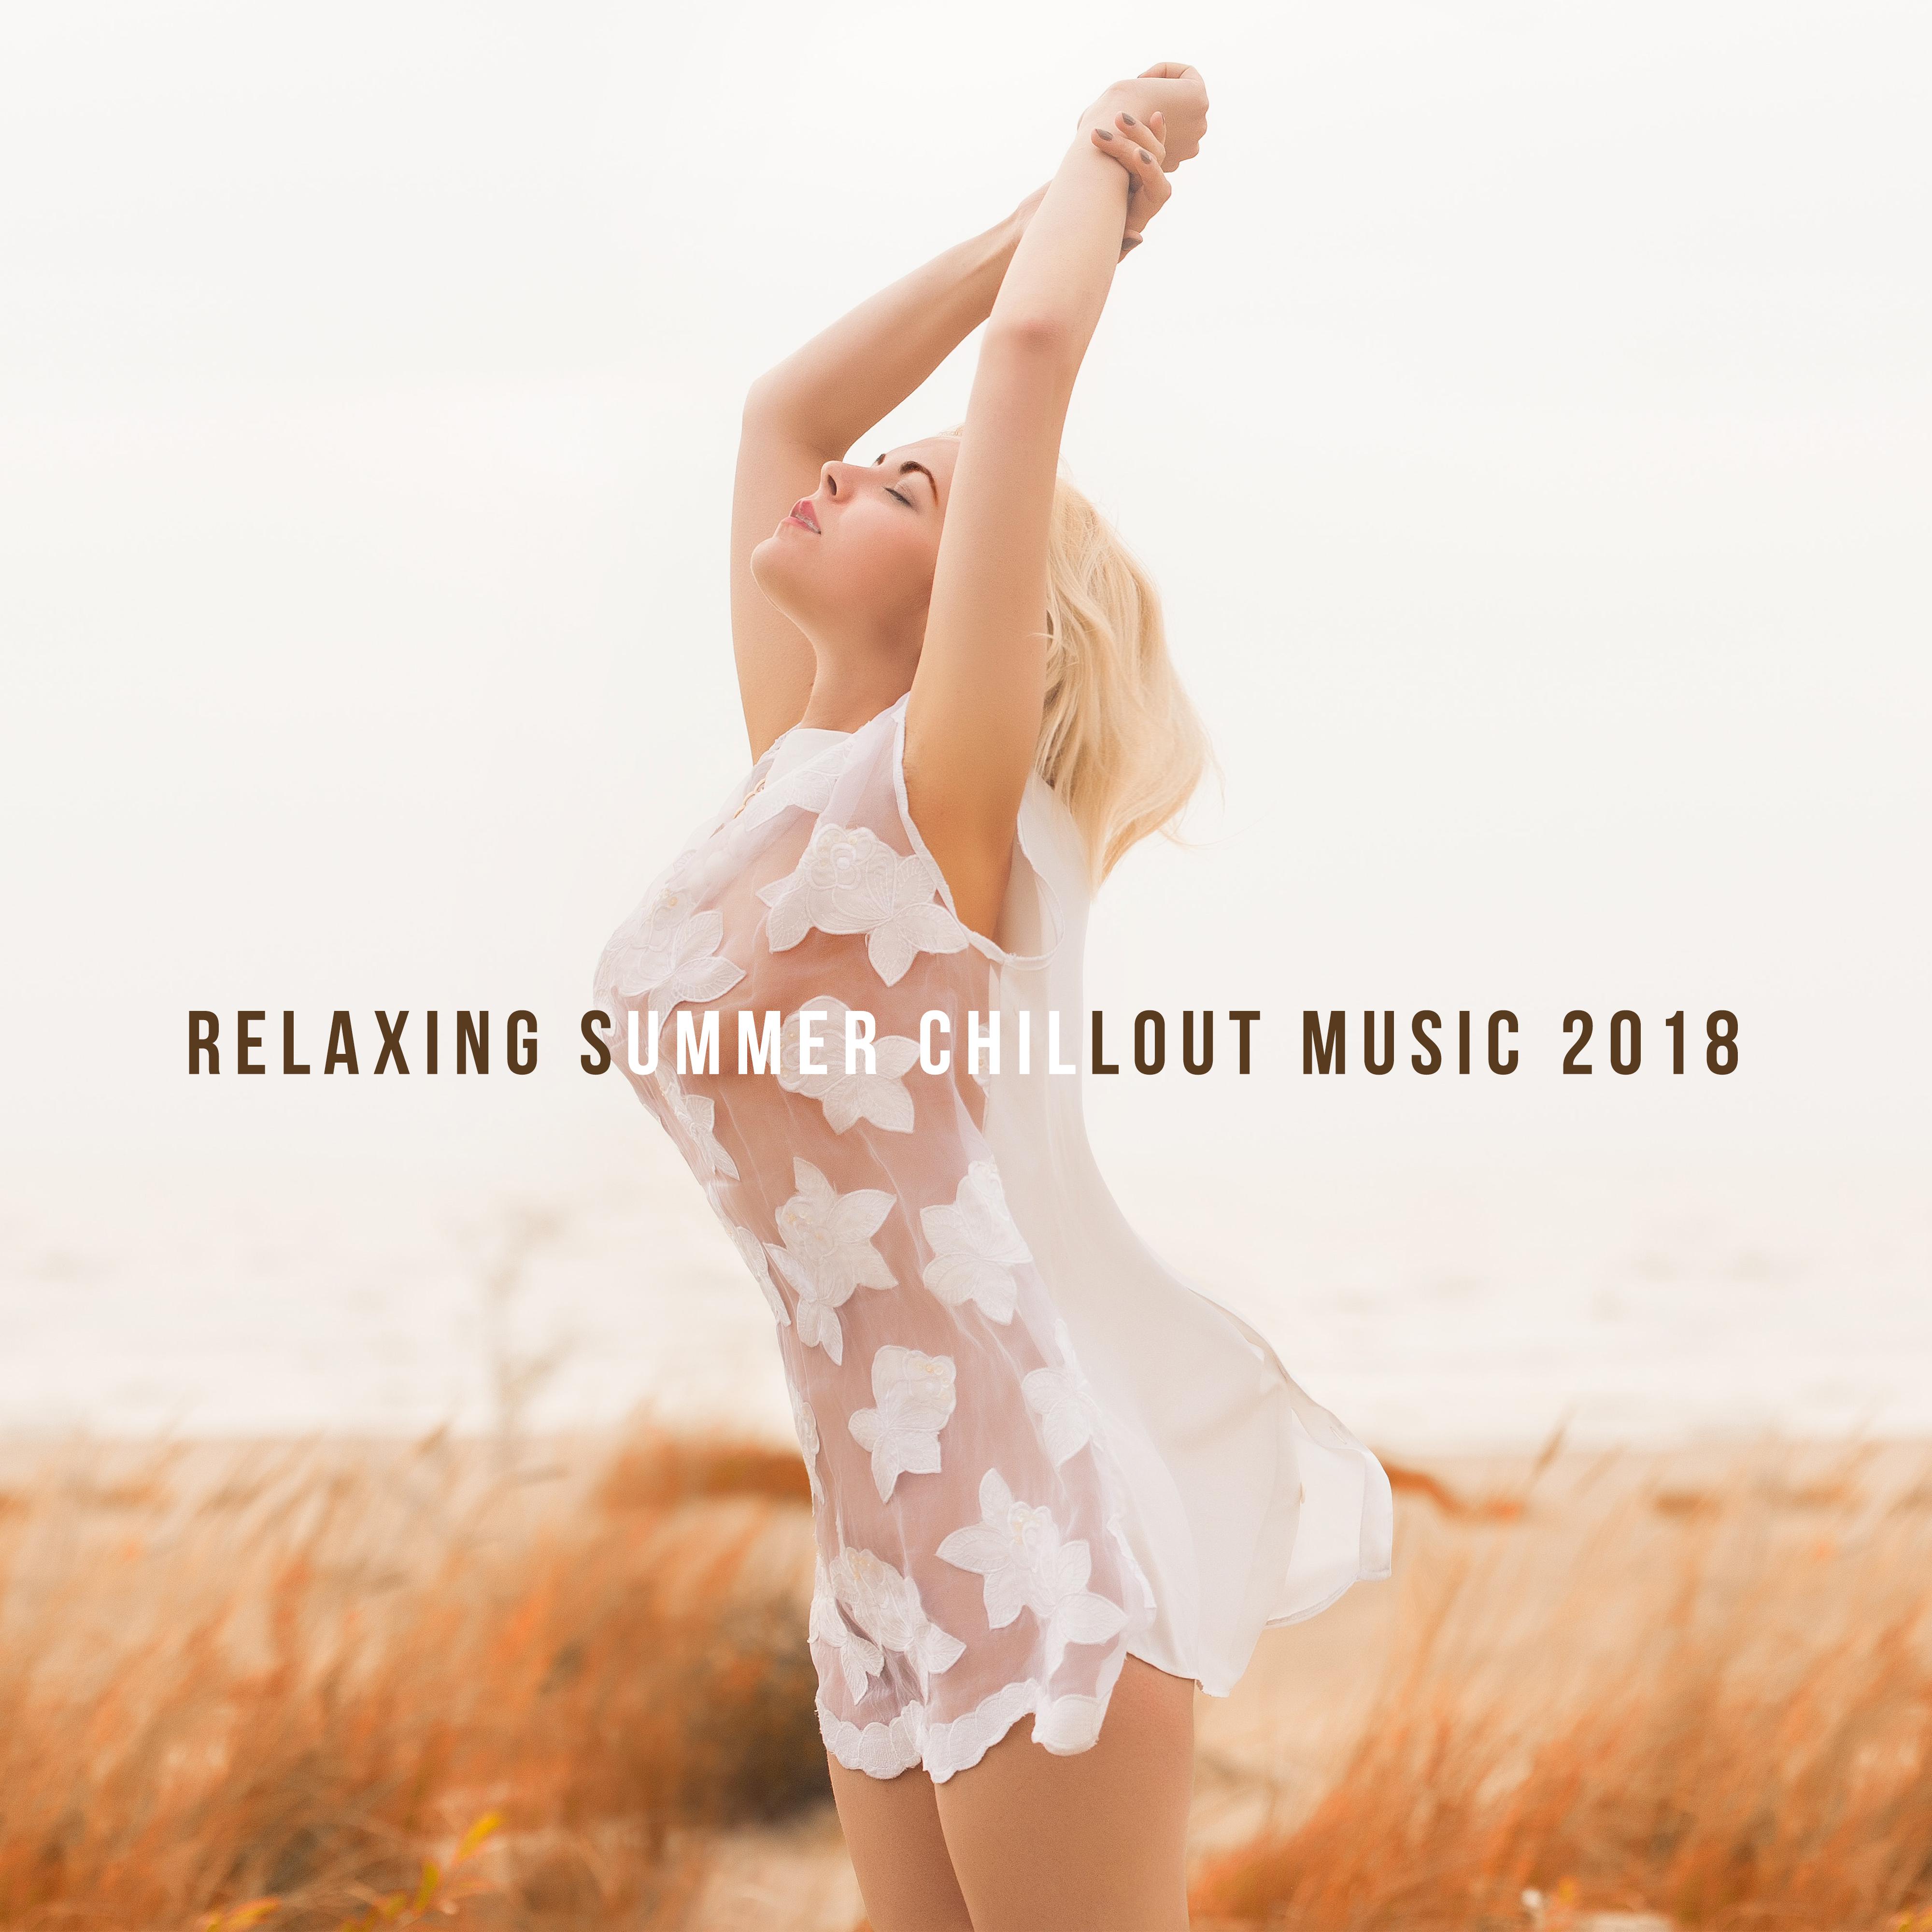 Relaxing Summer Chillout Music 2018